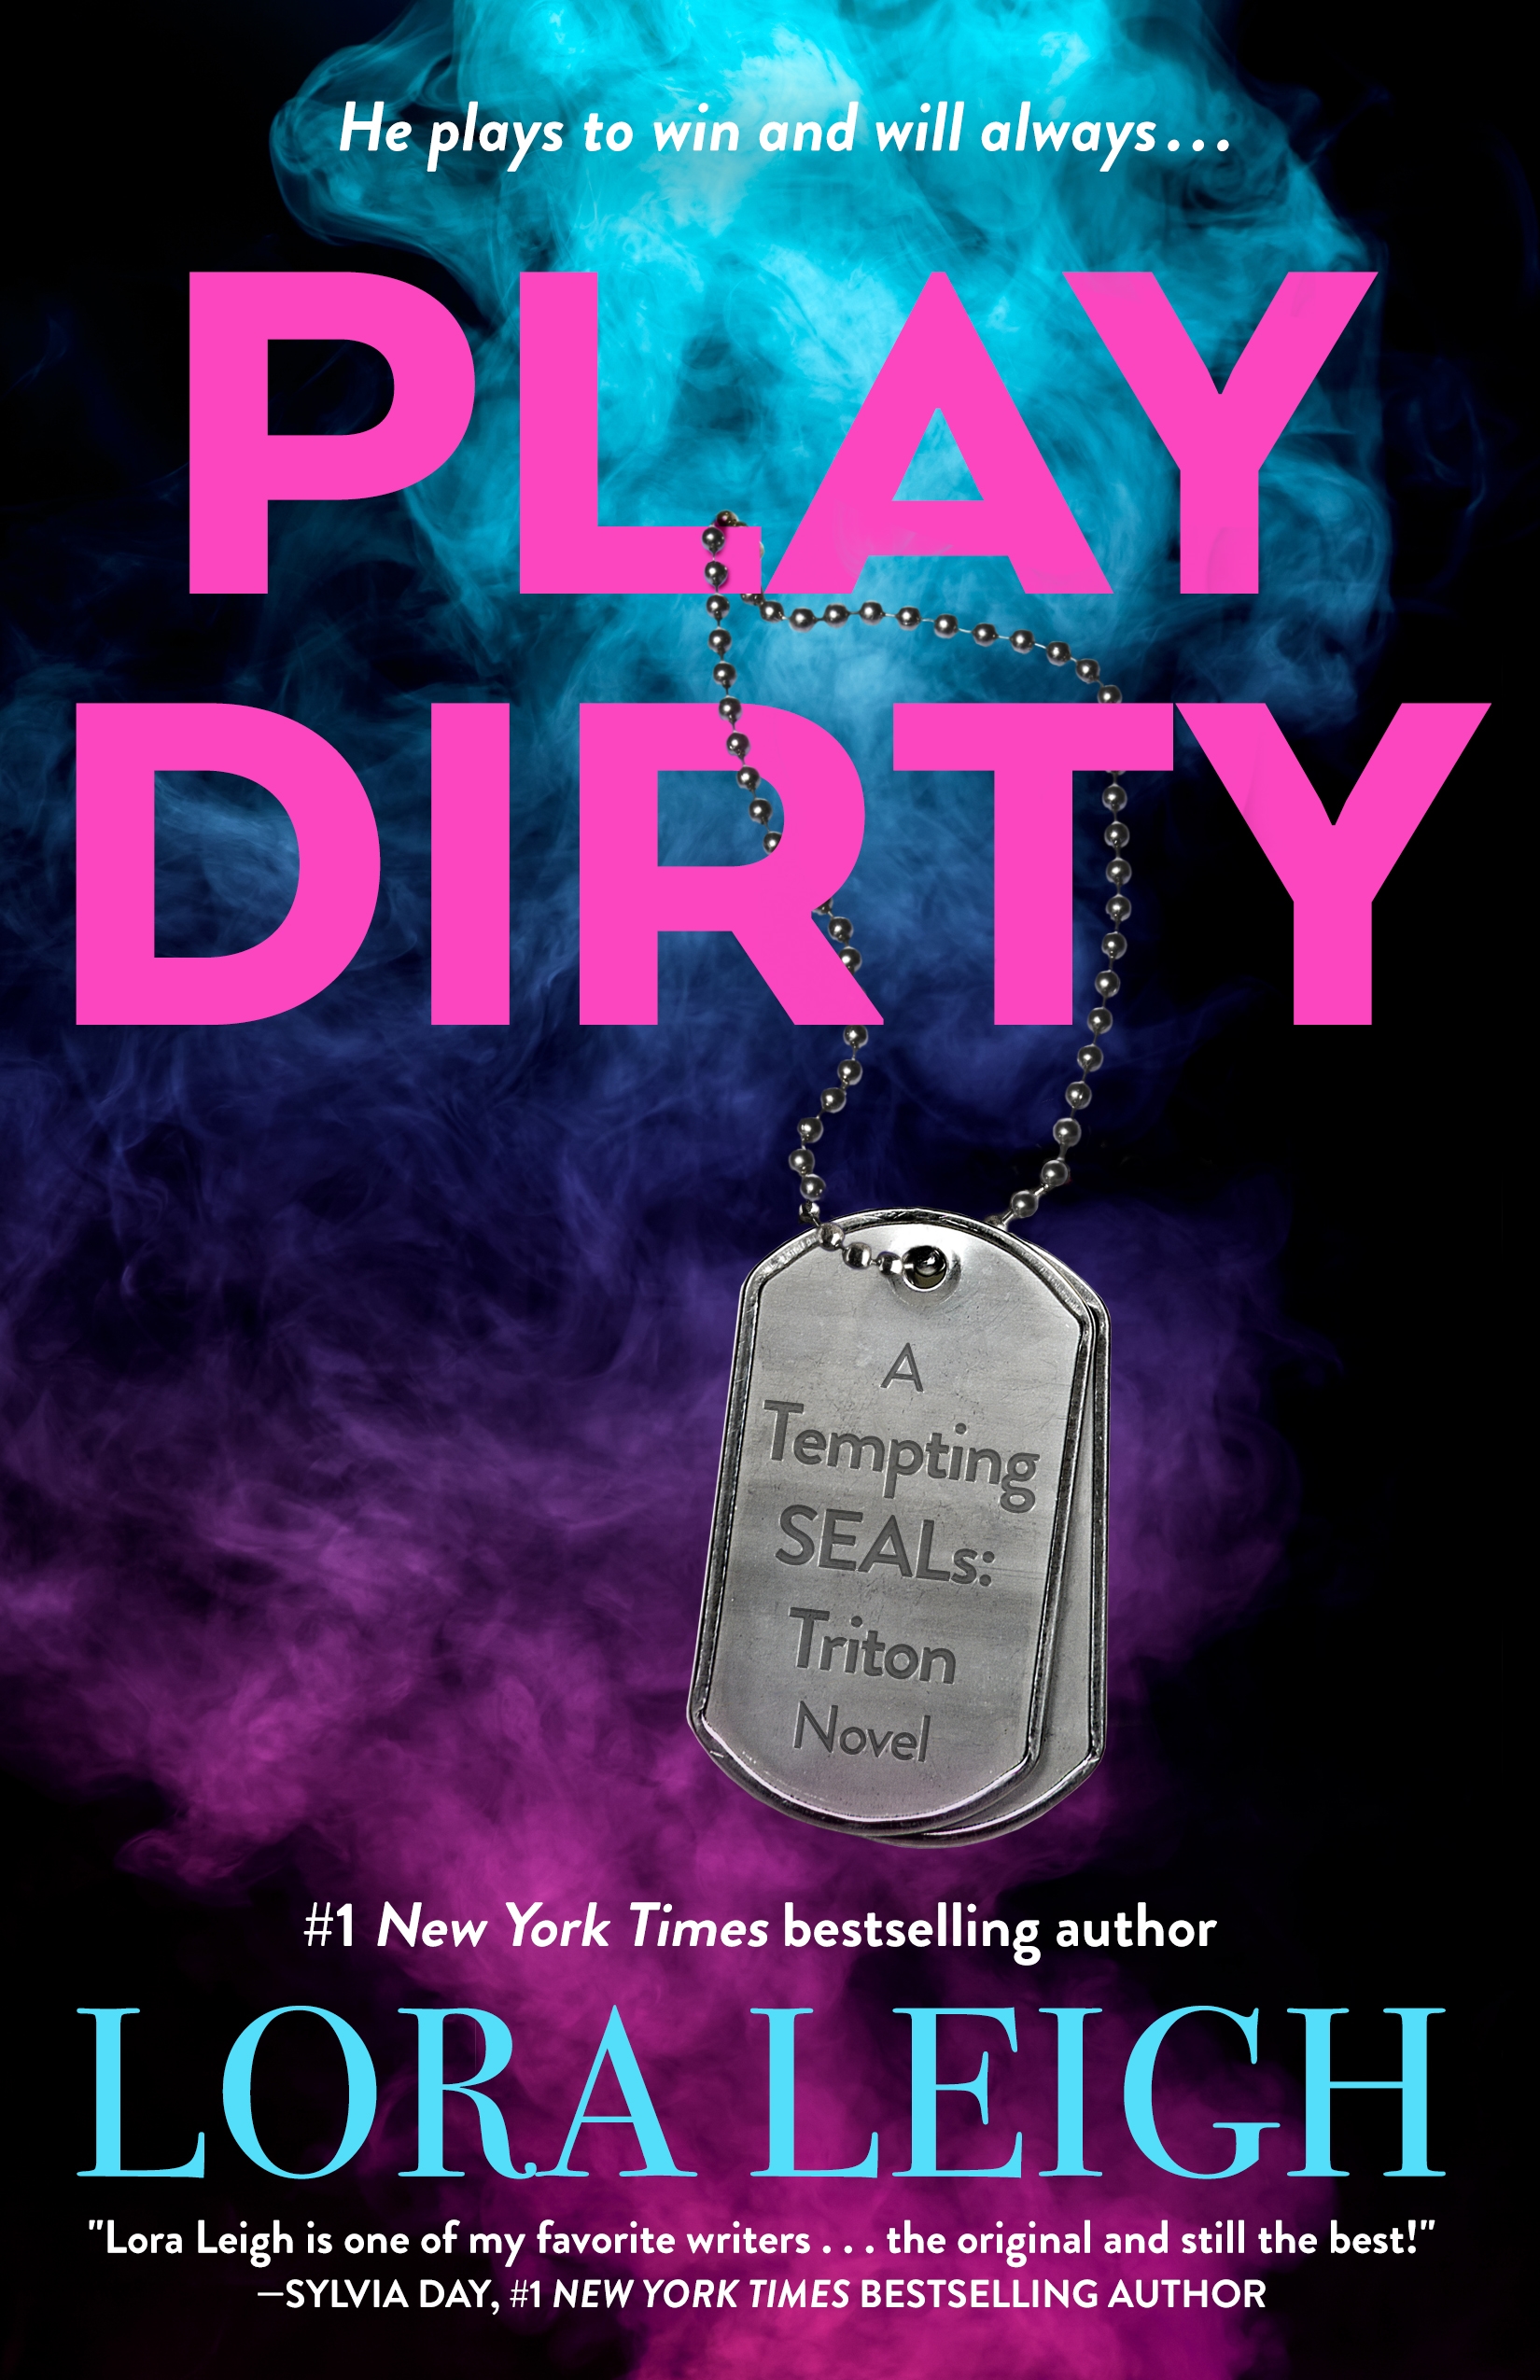 Play Dirty by Lora Leigh